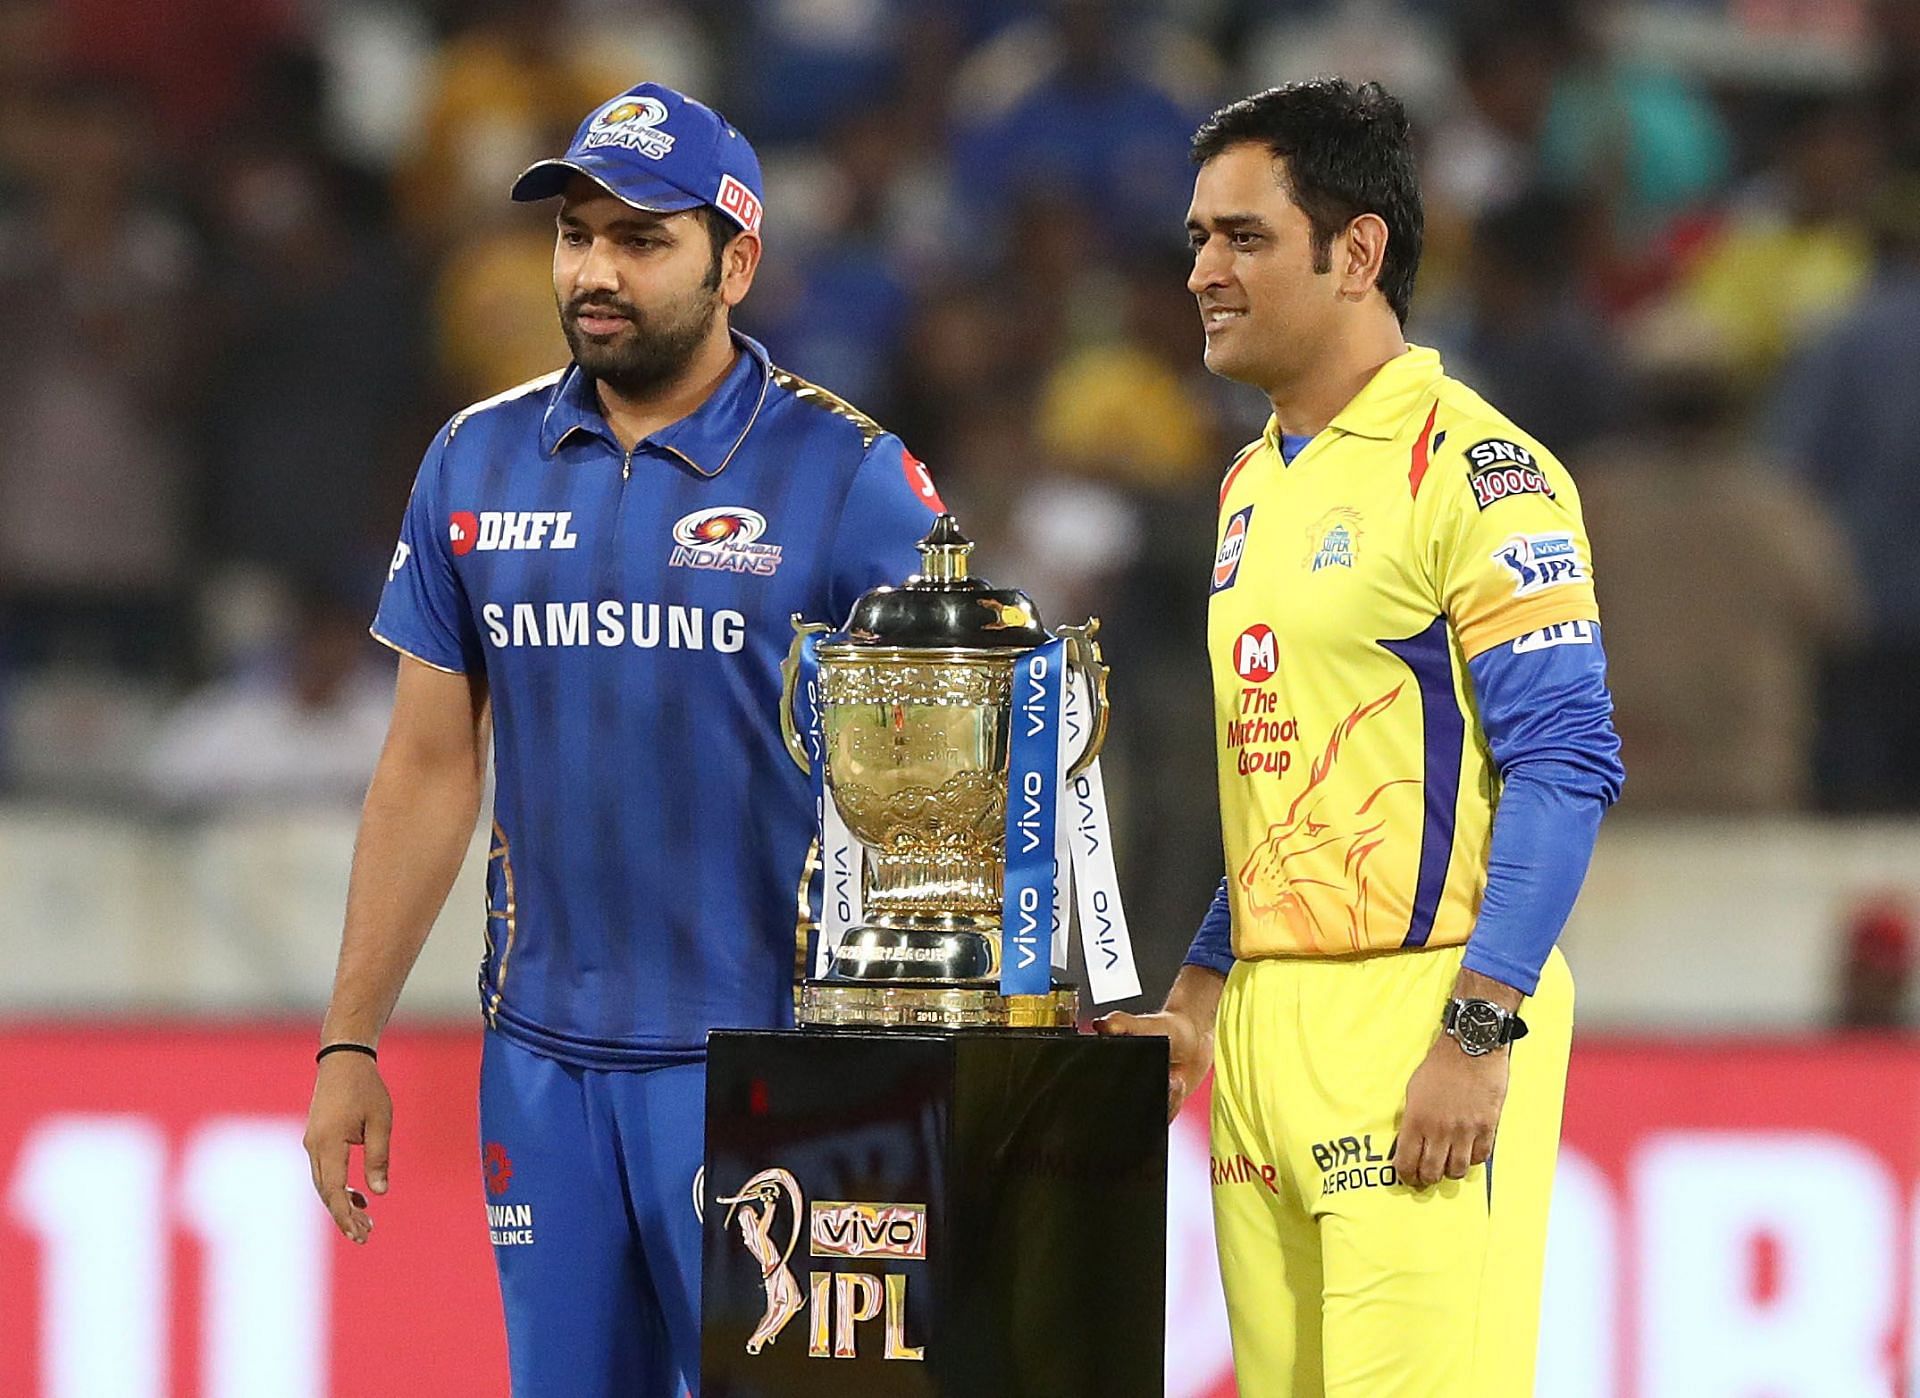 IPL 2022 will begin on March 26 at the Wankhede Stadium